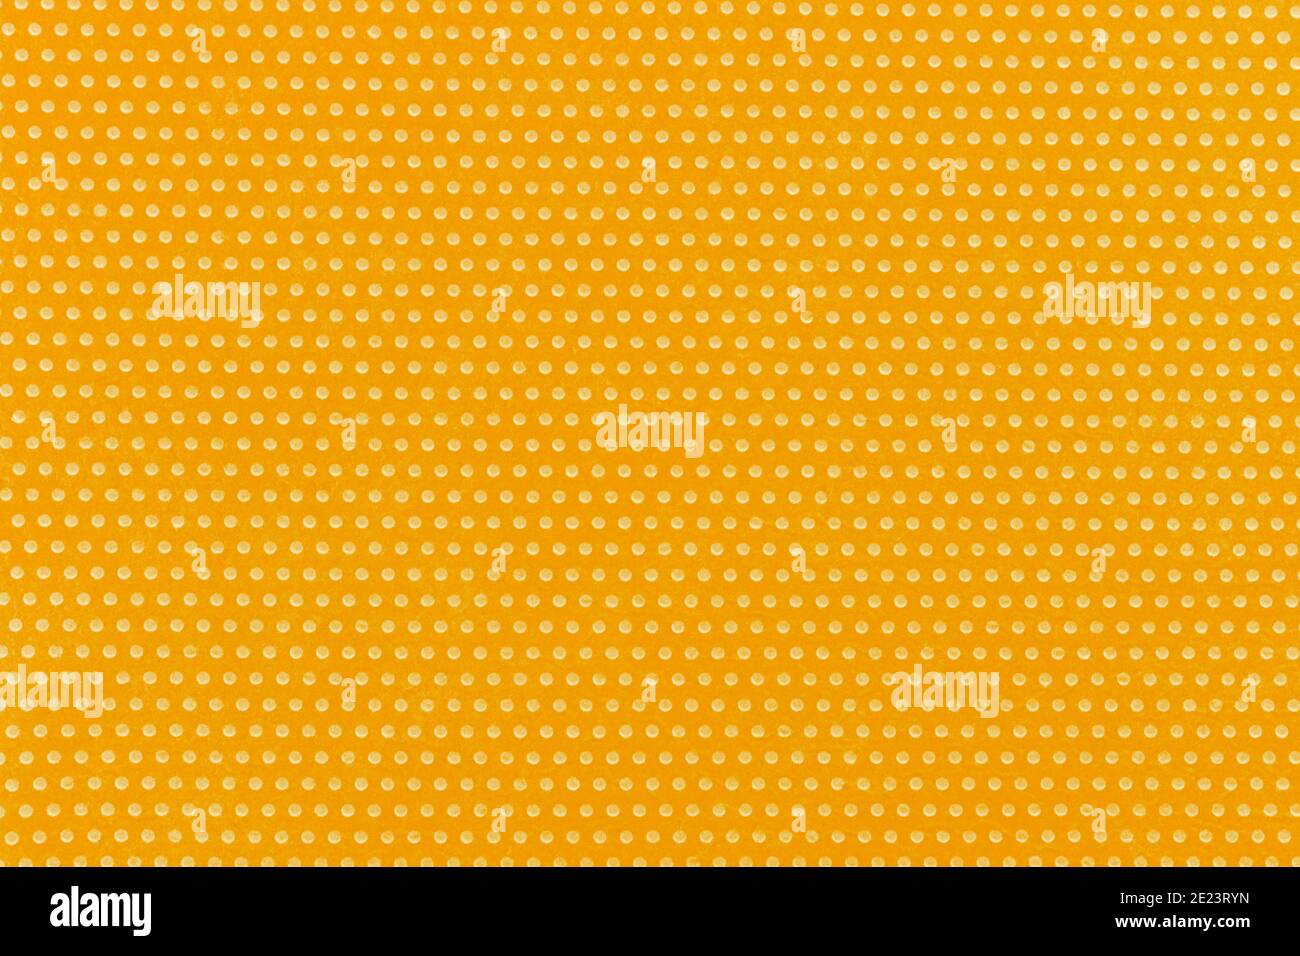 Textile homogeneous background color yellow in white fine polka dots, horizontal pattern. View from above. Emotionally warm sunny mustard sandy saturated. Stock Photo